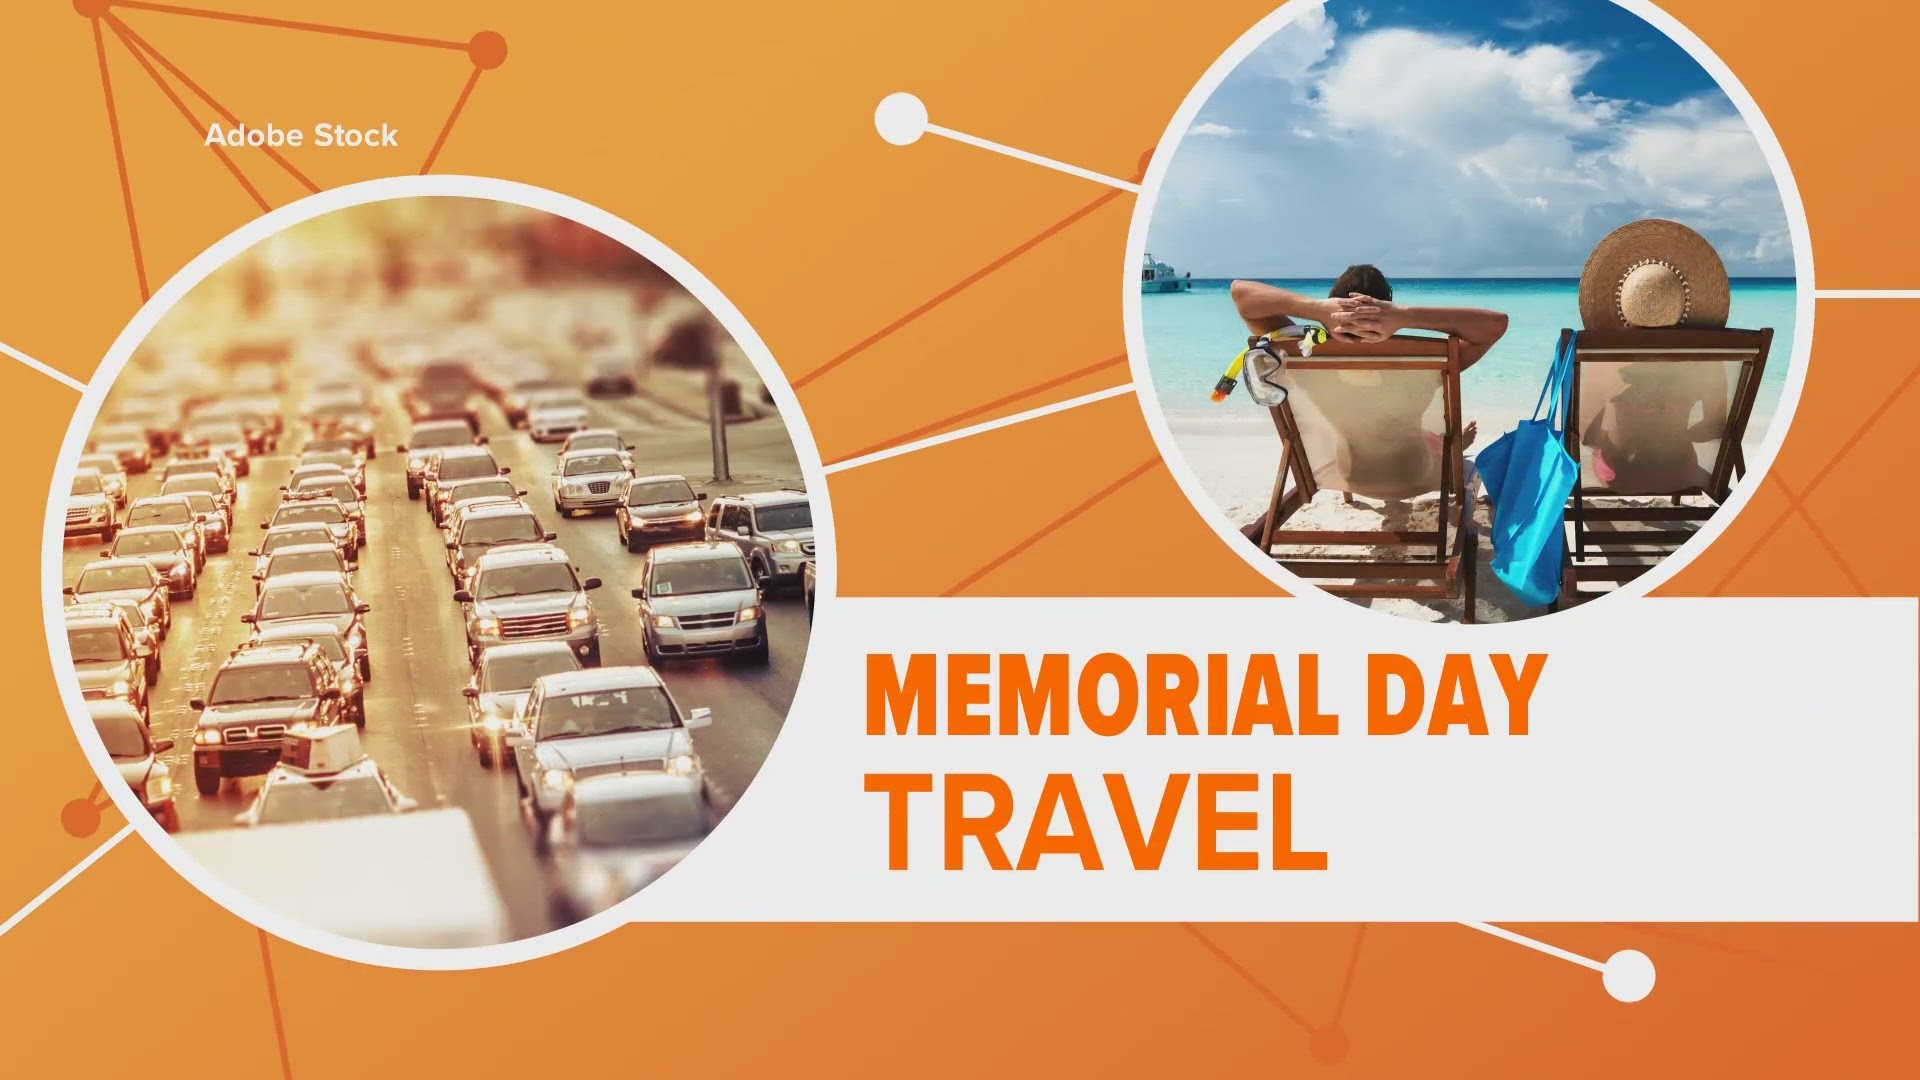 North Carolinians are expected to travel in record numbers this Memorial Day. And while many folks want to get away, they aren't looking forward to the traffic.